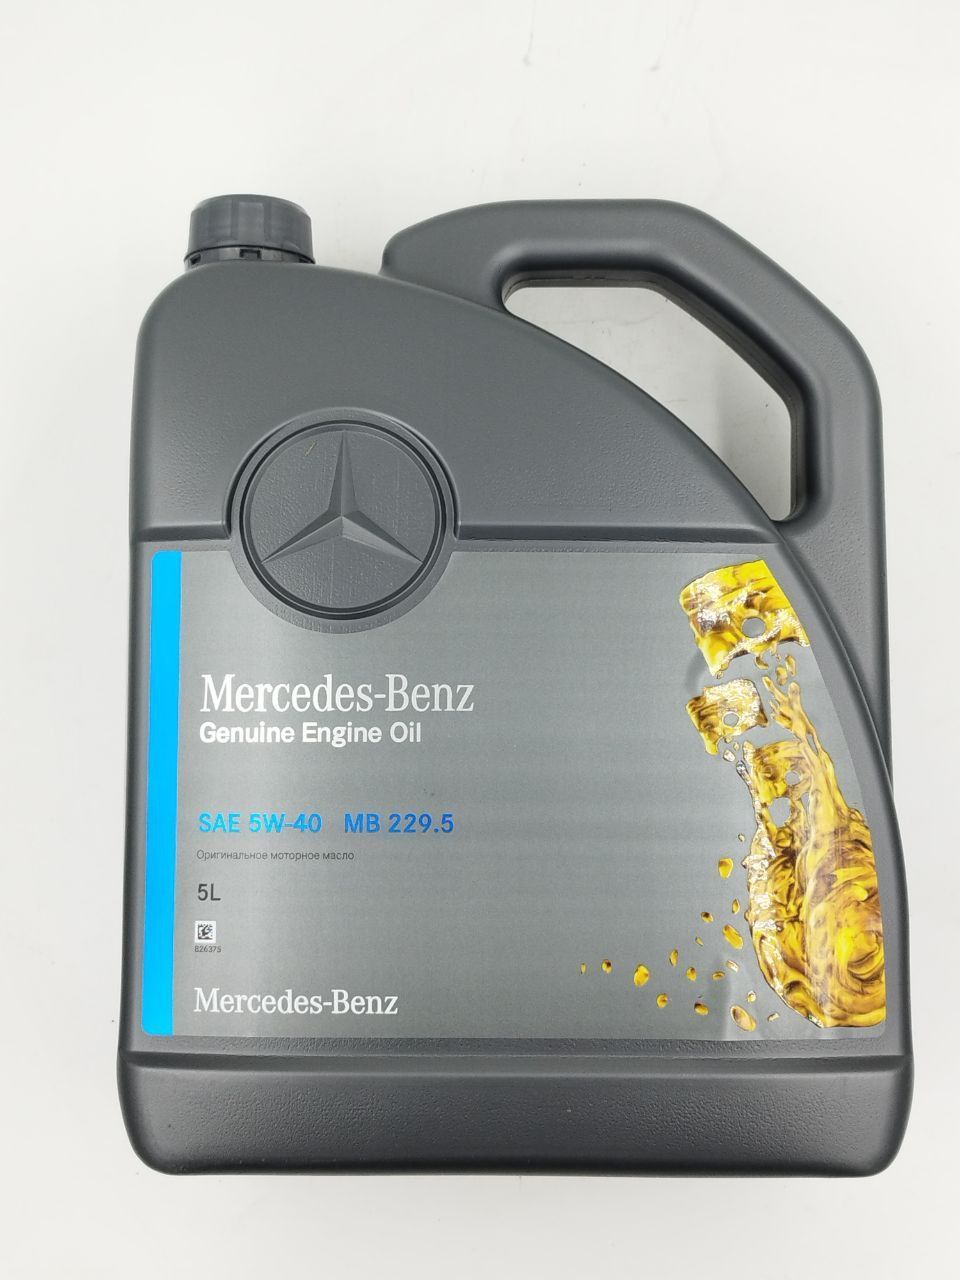 Масло мерседес 229.5 5w40. Масло Mercedes 229.5 5w40. Масло Мерседес 229.5. Масло Мерседес ЗТП. Prosel 4,5 Mersedes.